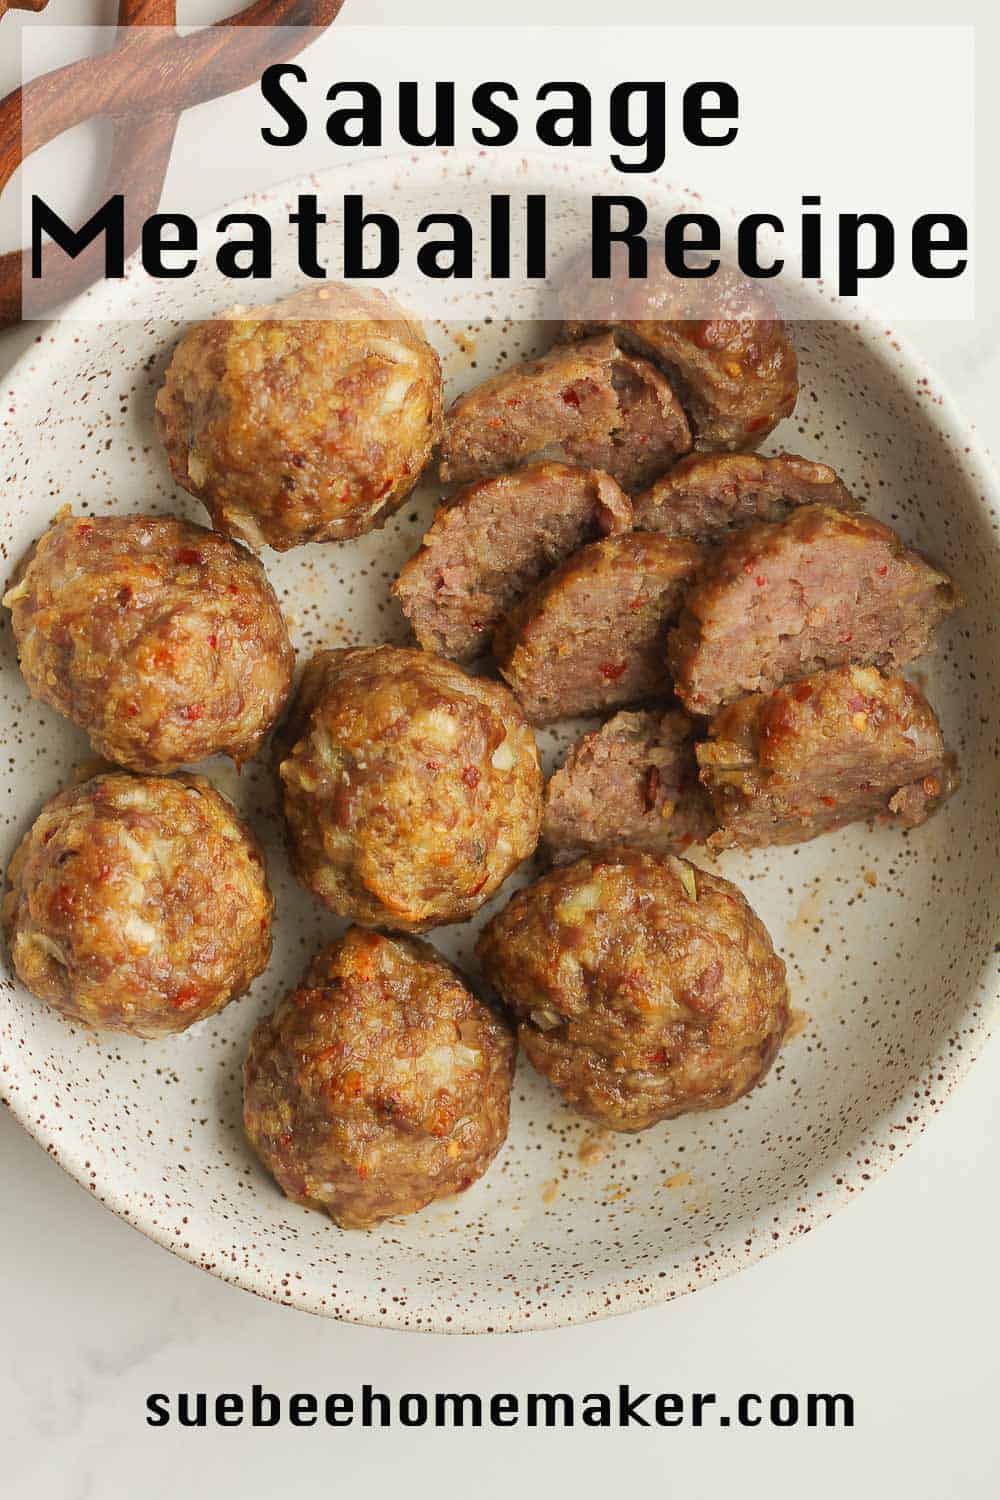 A bowl of sausage meatballs, with some sliced.